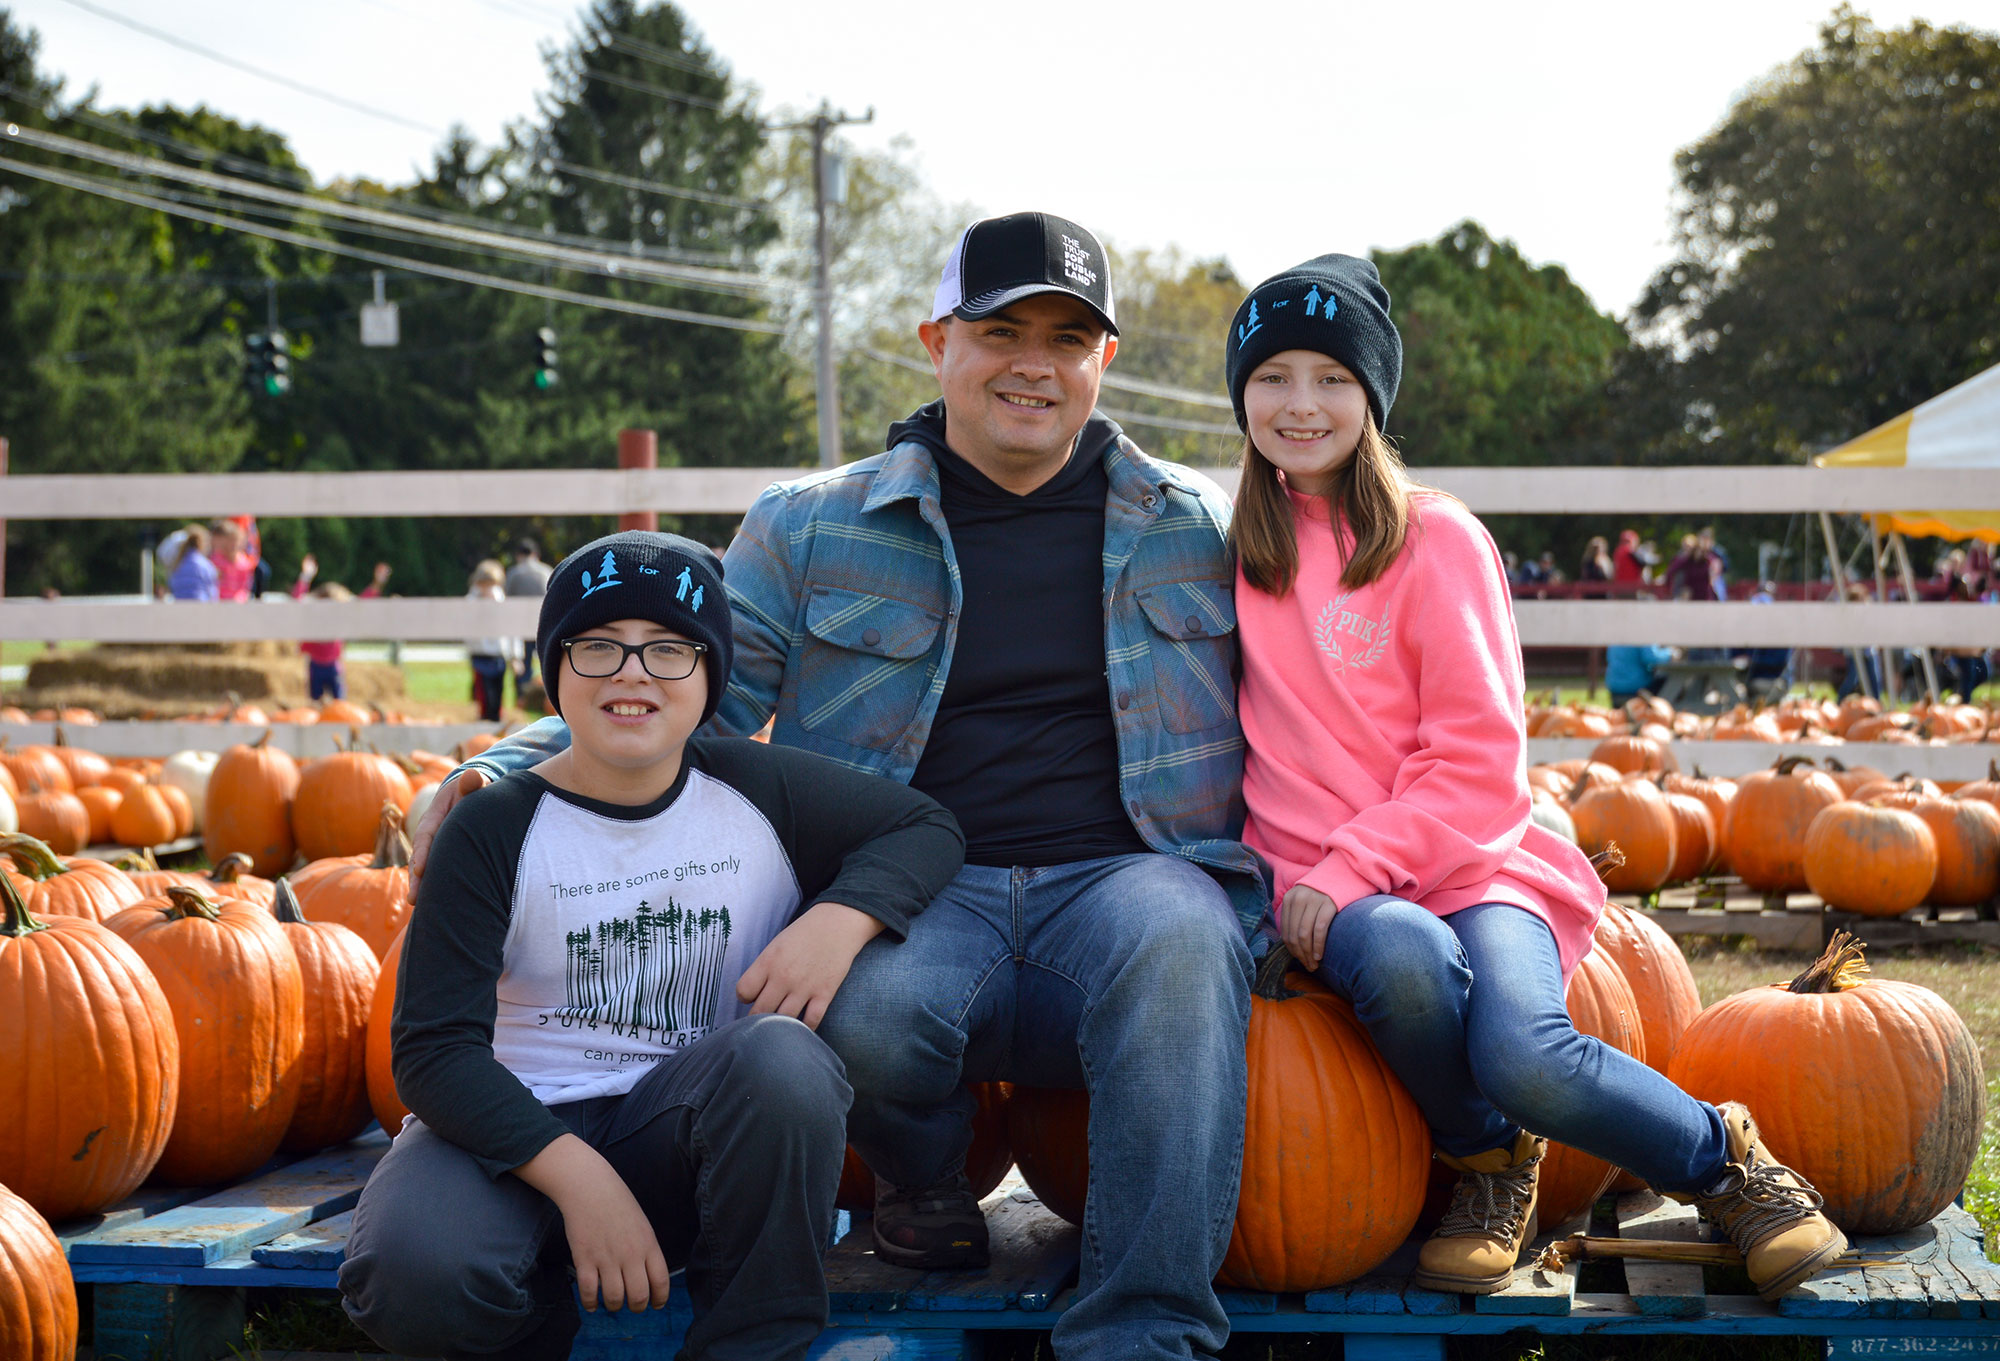 A man and two children posing for a photo in front of pumpkins.